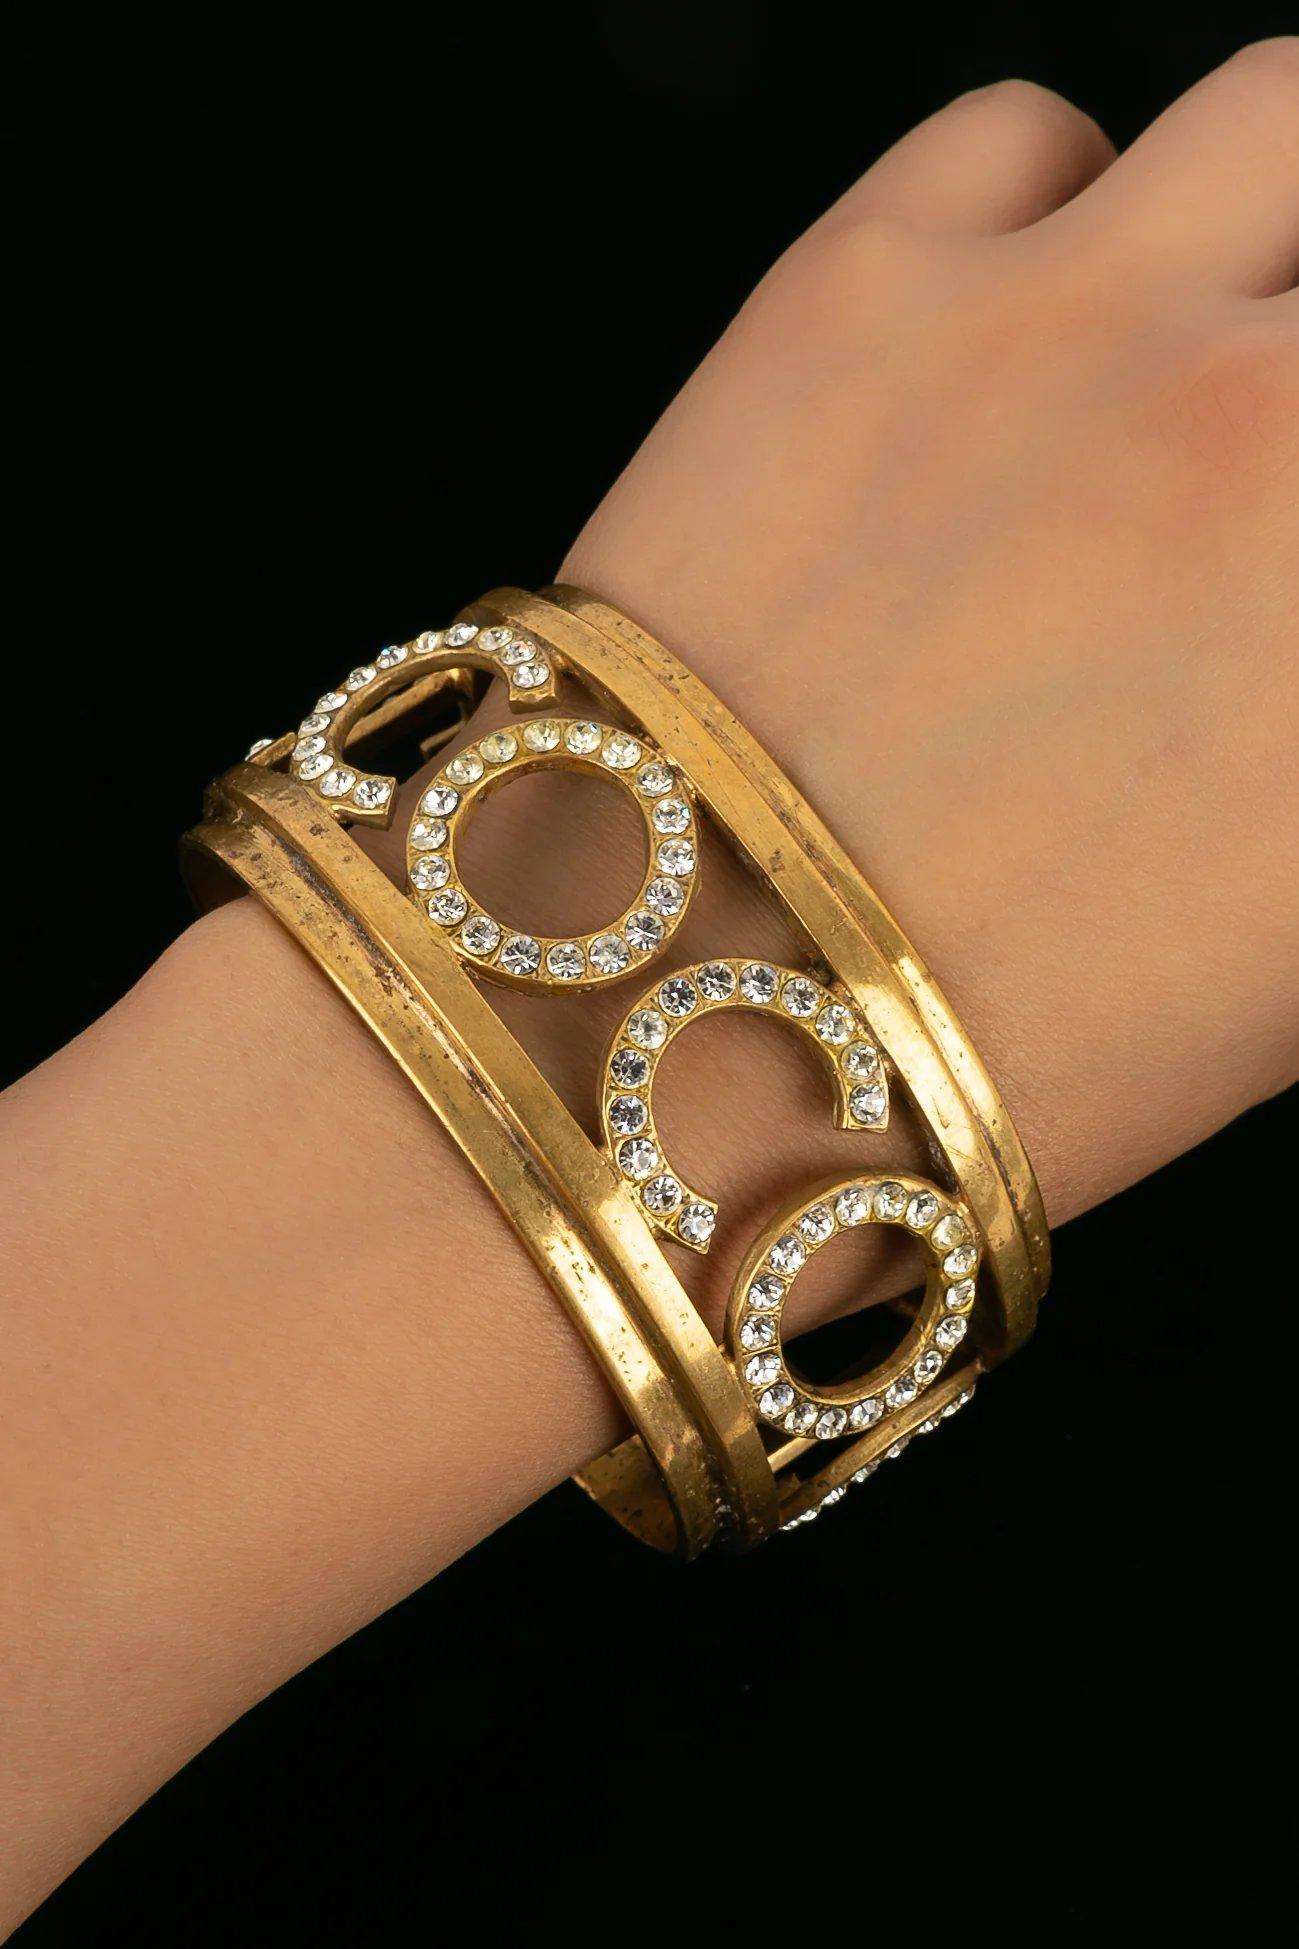 Chanel Gold Metal Cuff Bracelet Paved with Rhinestones 1